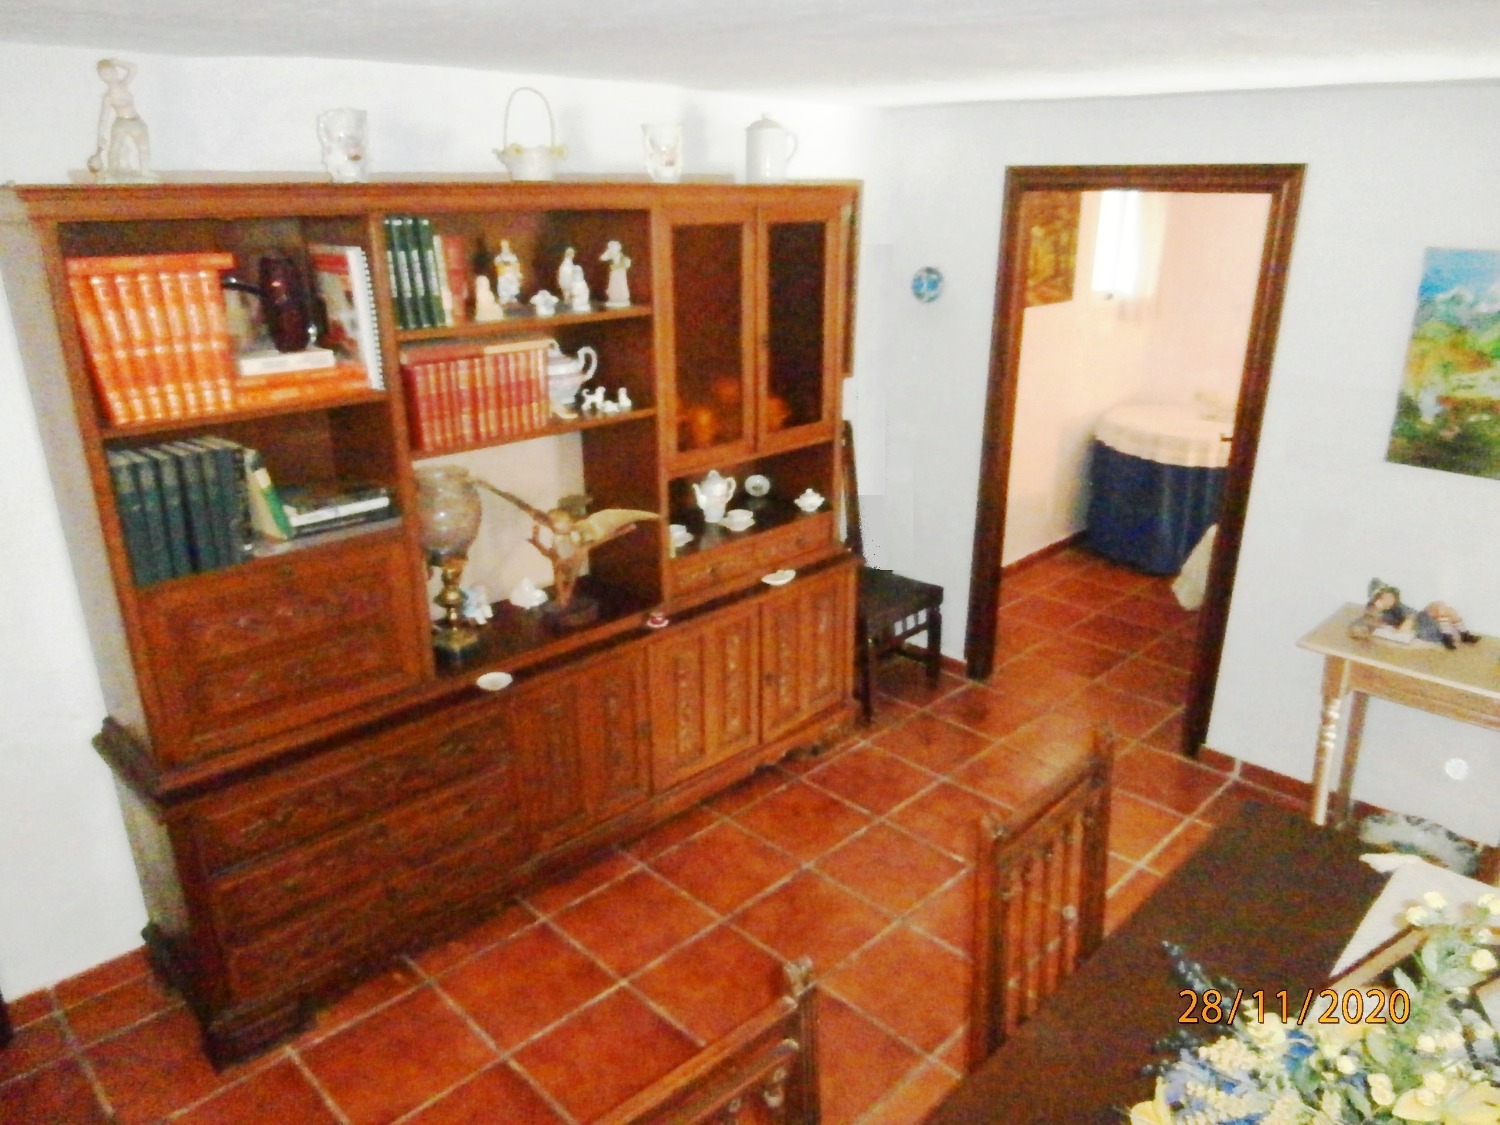 Large Andalusian-style semi-detached country house with pool, arable land, fully fenced 3,220 m2 approx, good access.